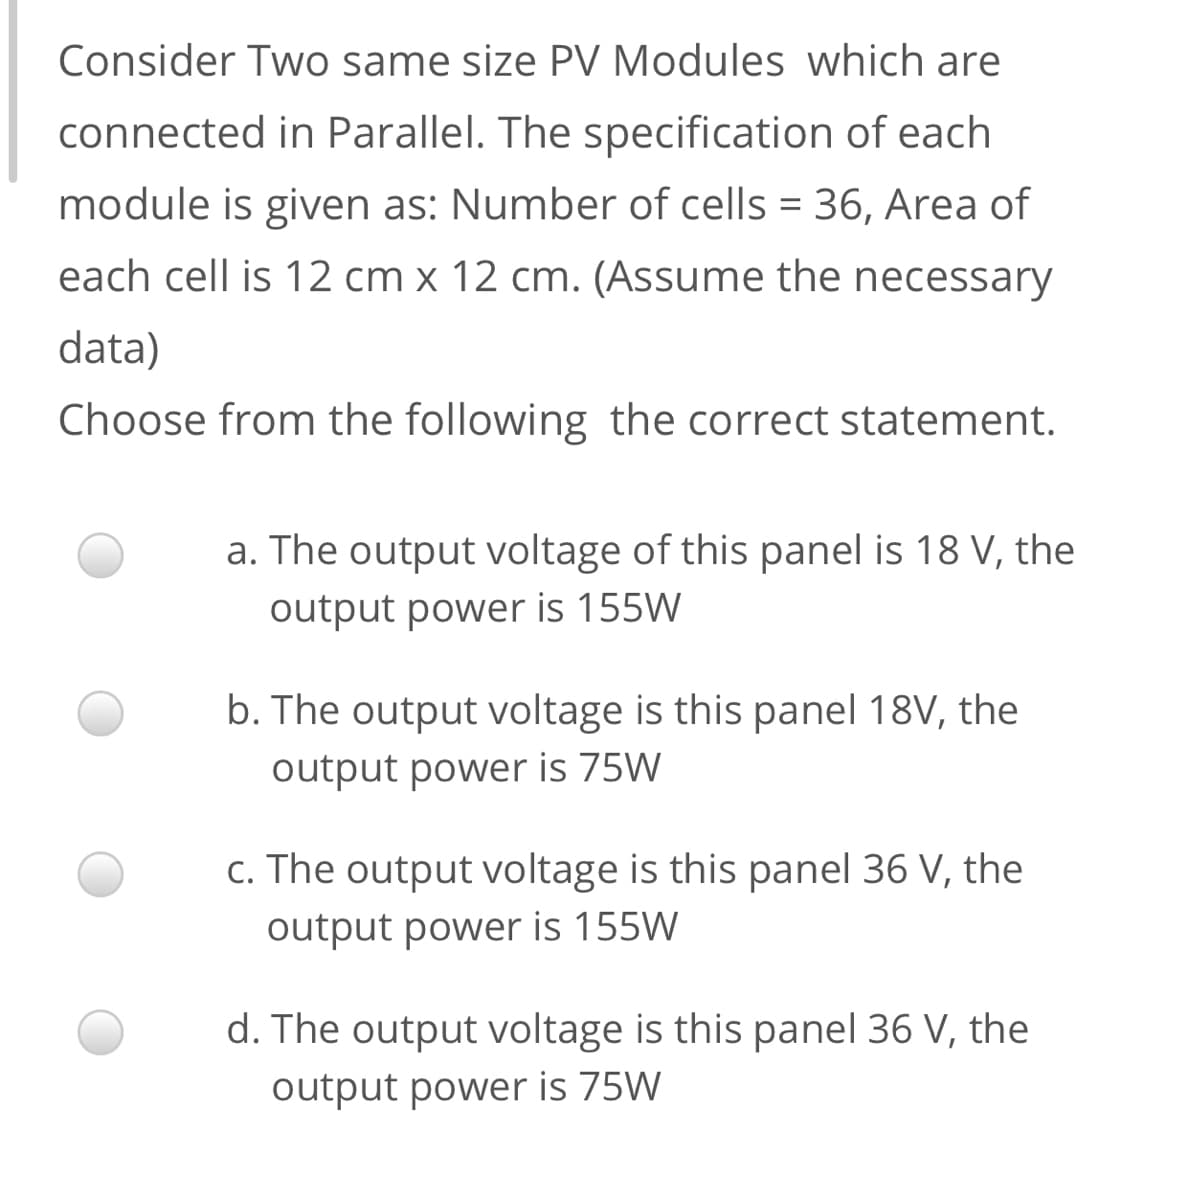 Consider Two same size PV Modules which are
connected in Parallel. The specification of each
module is given as: Number of cells = 36, Area of
each cell is 12 cm x 12 cm. (Assume the necessary
data)
Choose from the following the correct statement.
a. The output voltage of this panel is 18 V, the
output power is 155W
b. The output voltage is this panel 18V, the
output power is 75W
c. The output voltage is this panel 36 V, the
output power is 155W
d. The output voltage is this panel 36 V, the
output power is 75W
